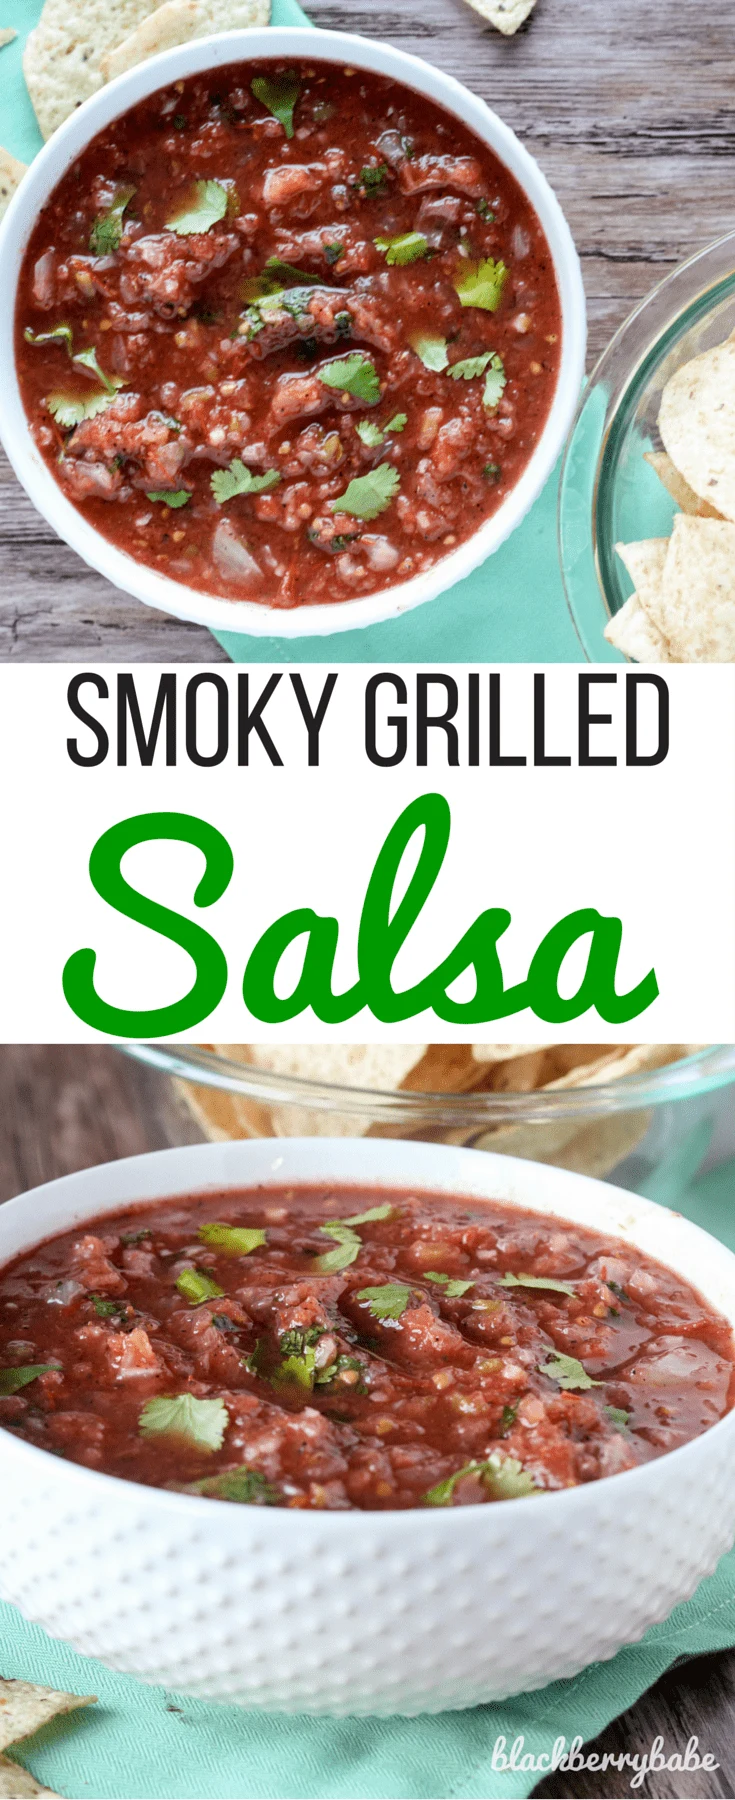 Smoky Grilled Salsa Chevy's Fresh Mex Knock Off Recipe